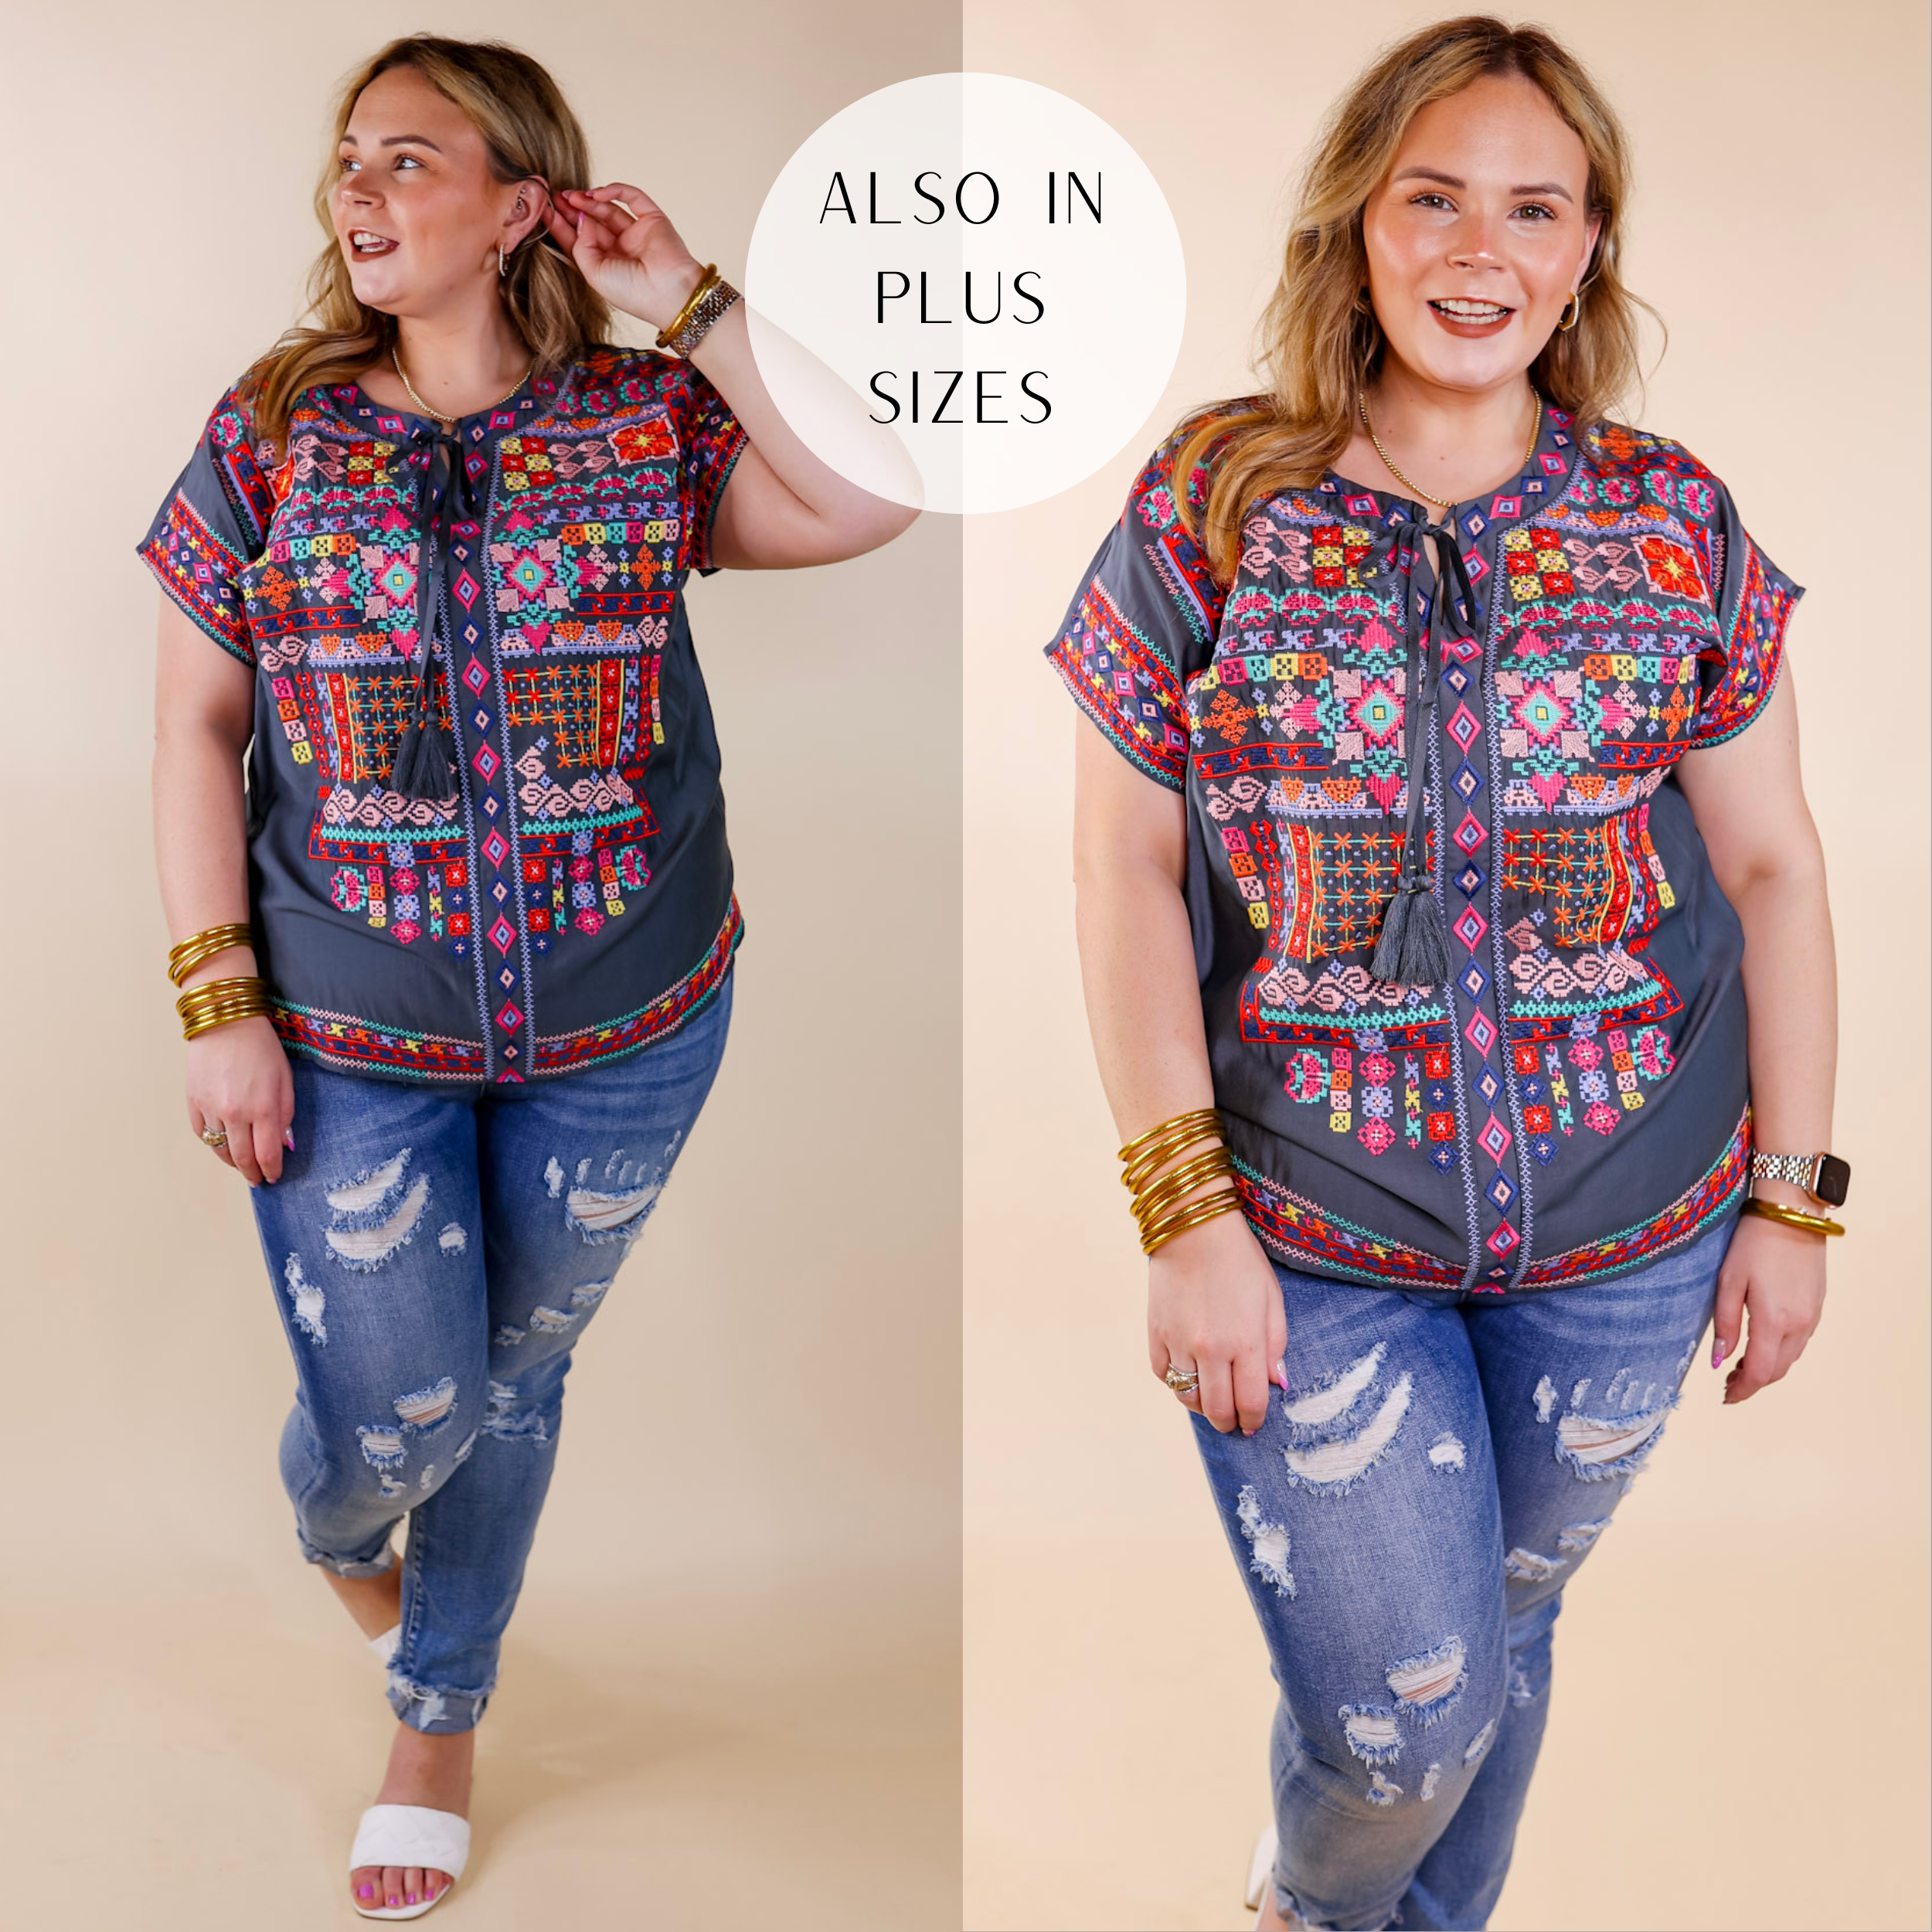 Model is wearing a grey short sleeve top with a keyhole neckline and colorful embroidery all over the front. Model has it paired with distressed skinny jeans, white heels, and gold jewelry.